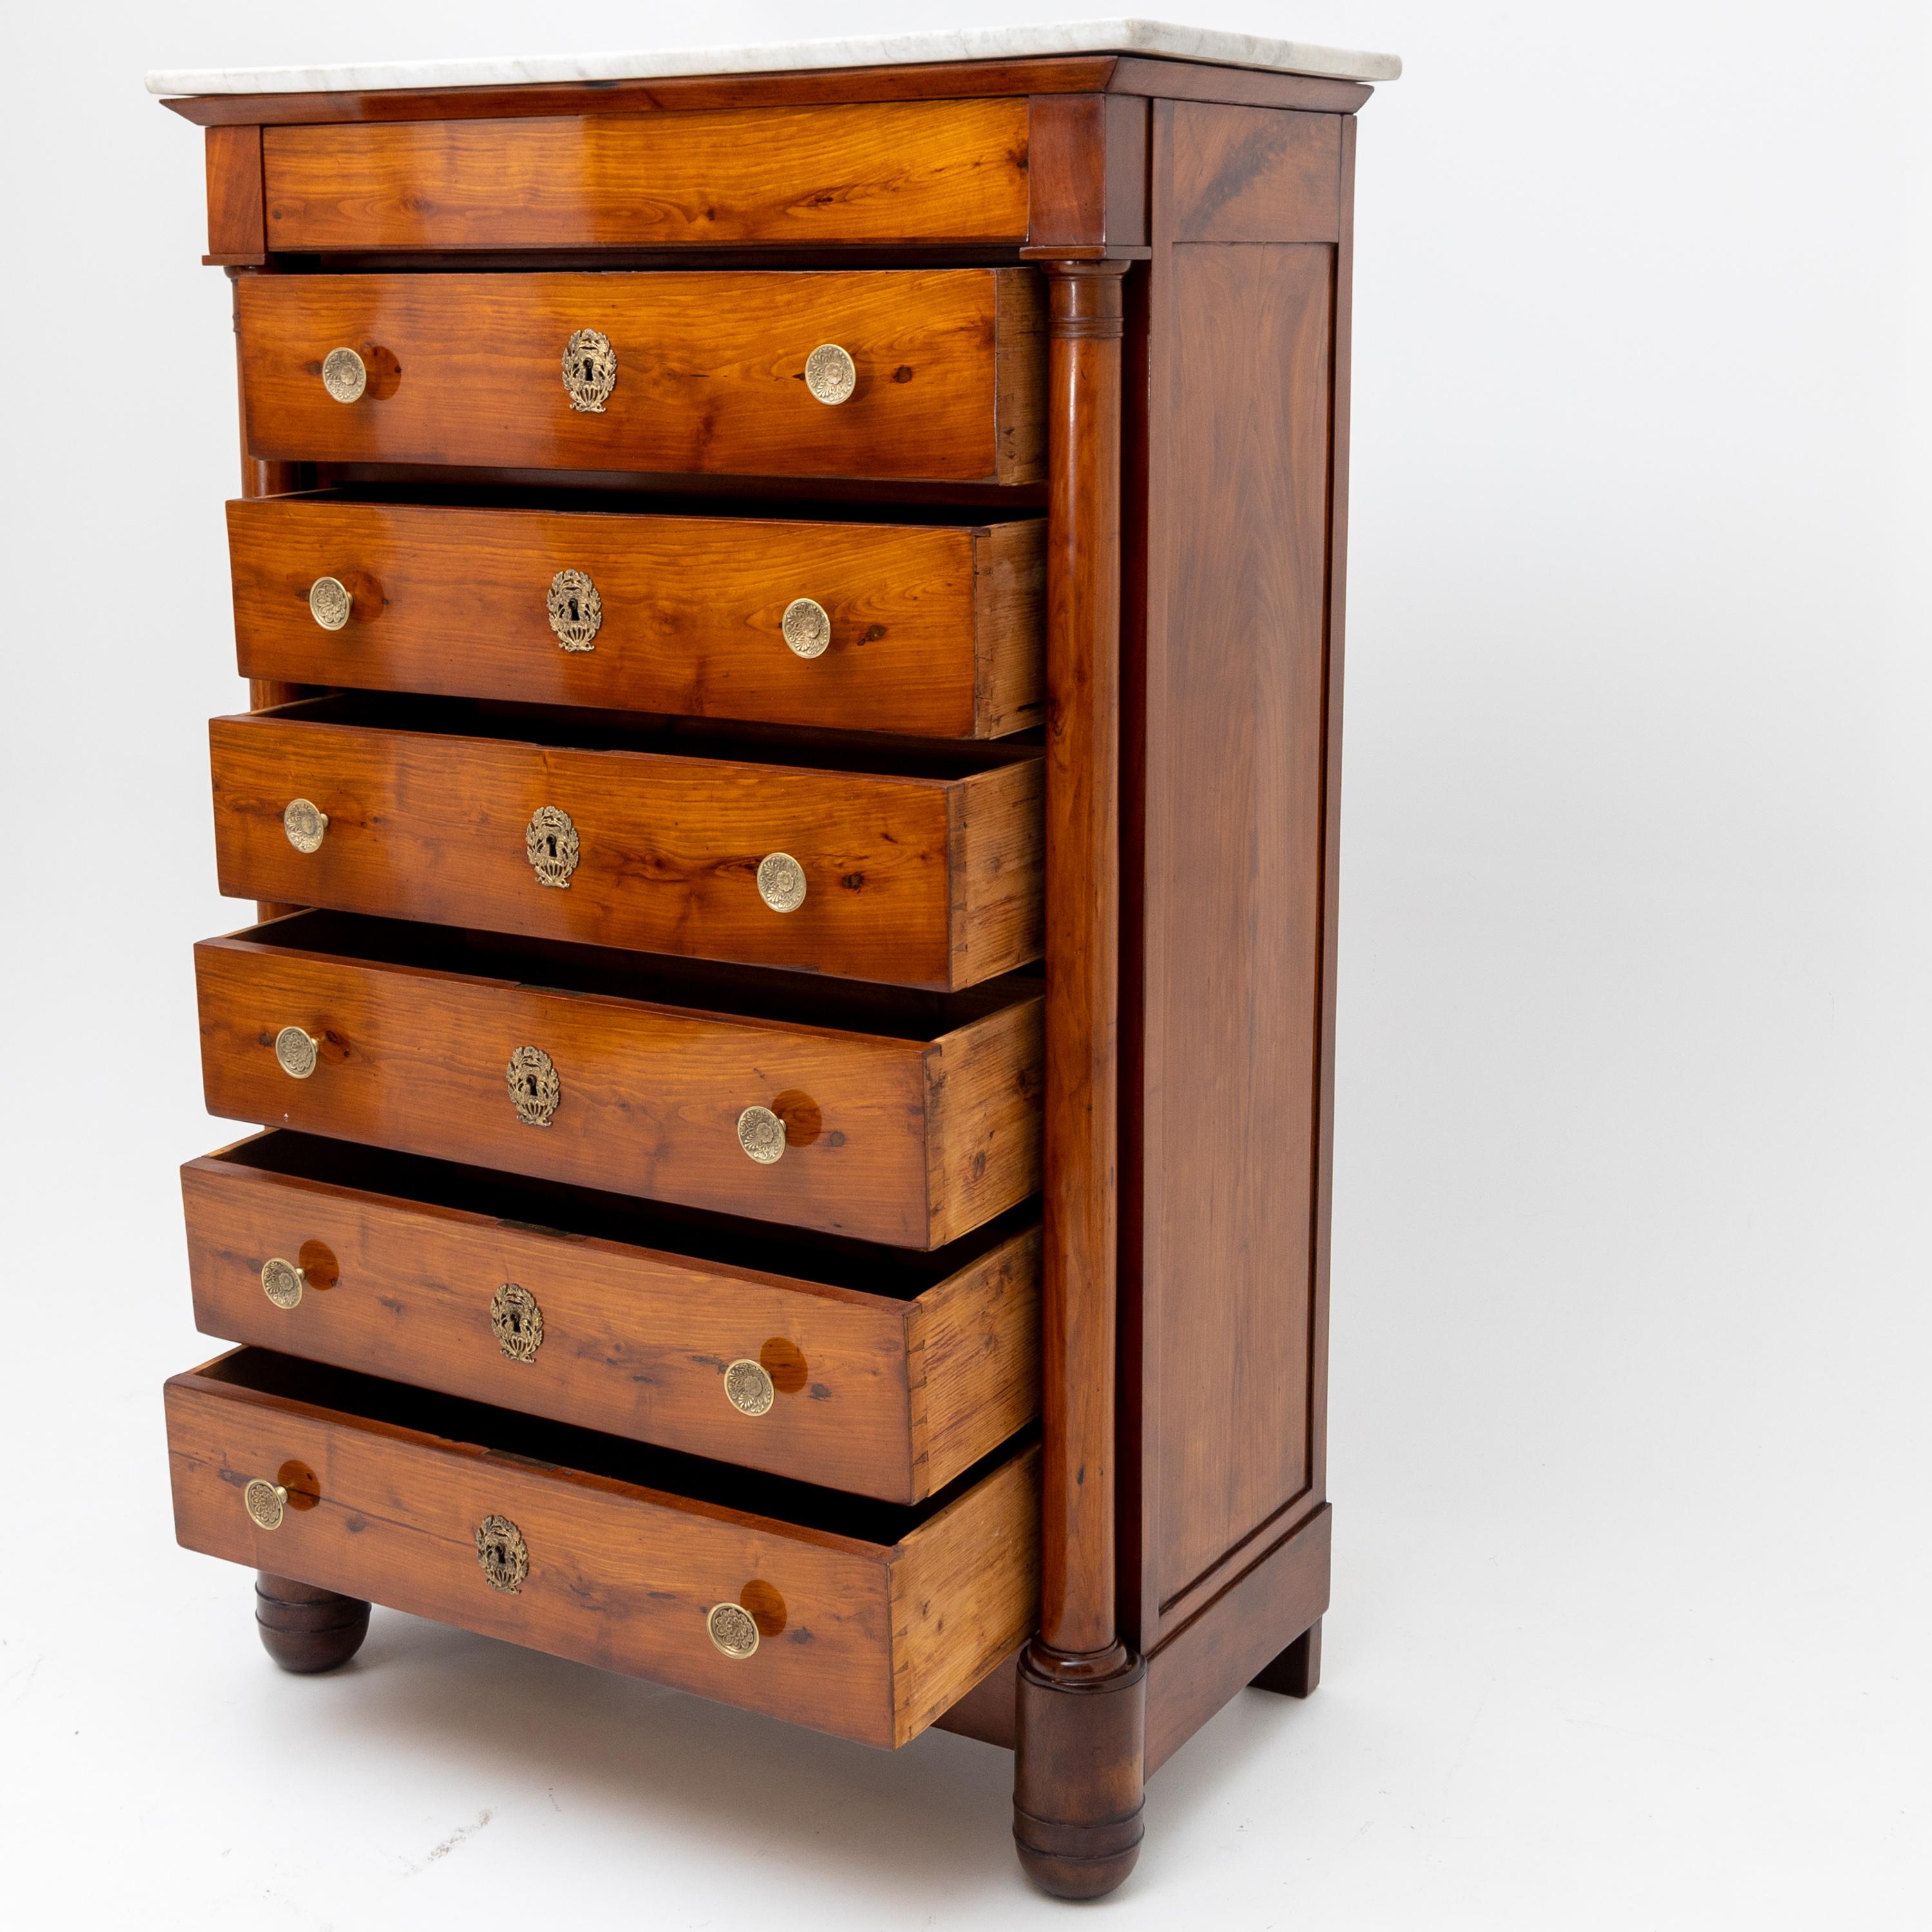 High chest or semainiere with seven drawers, marble top, brass handles and columns.